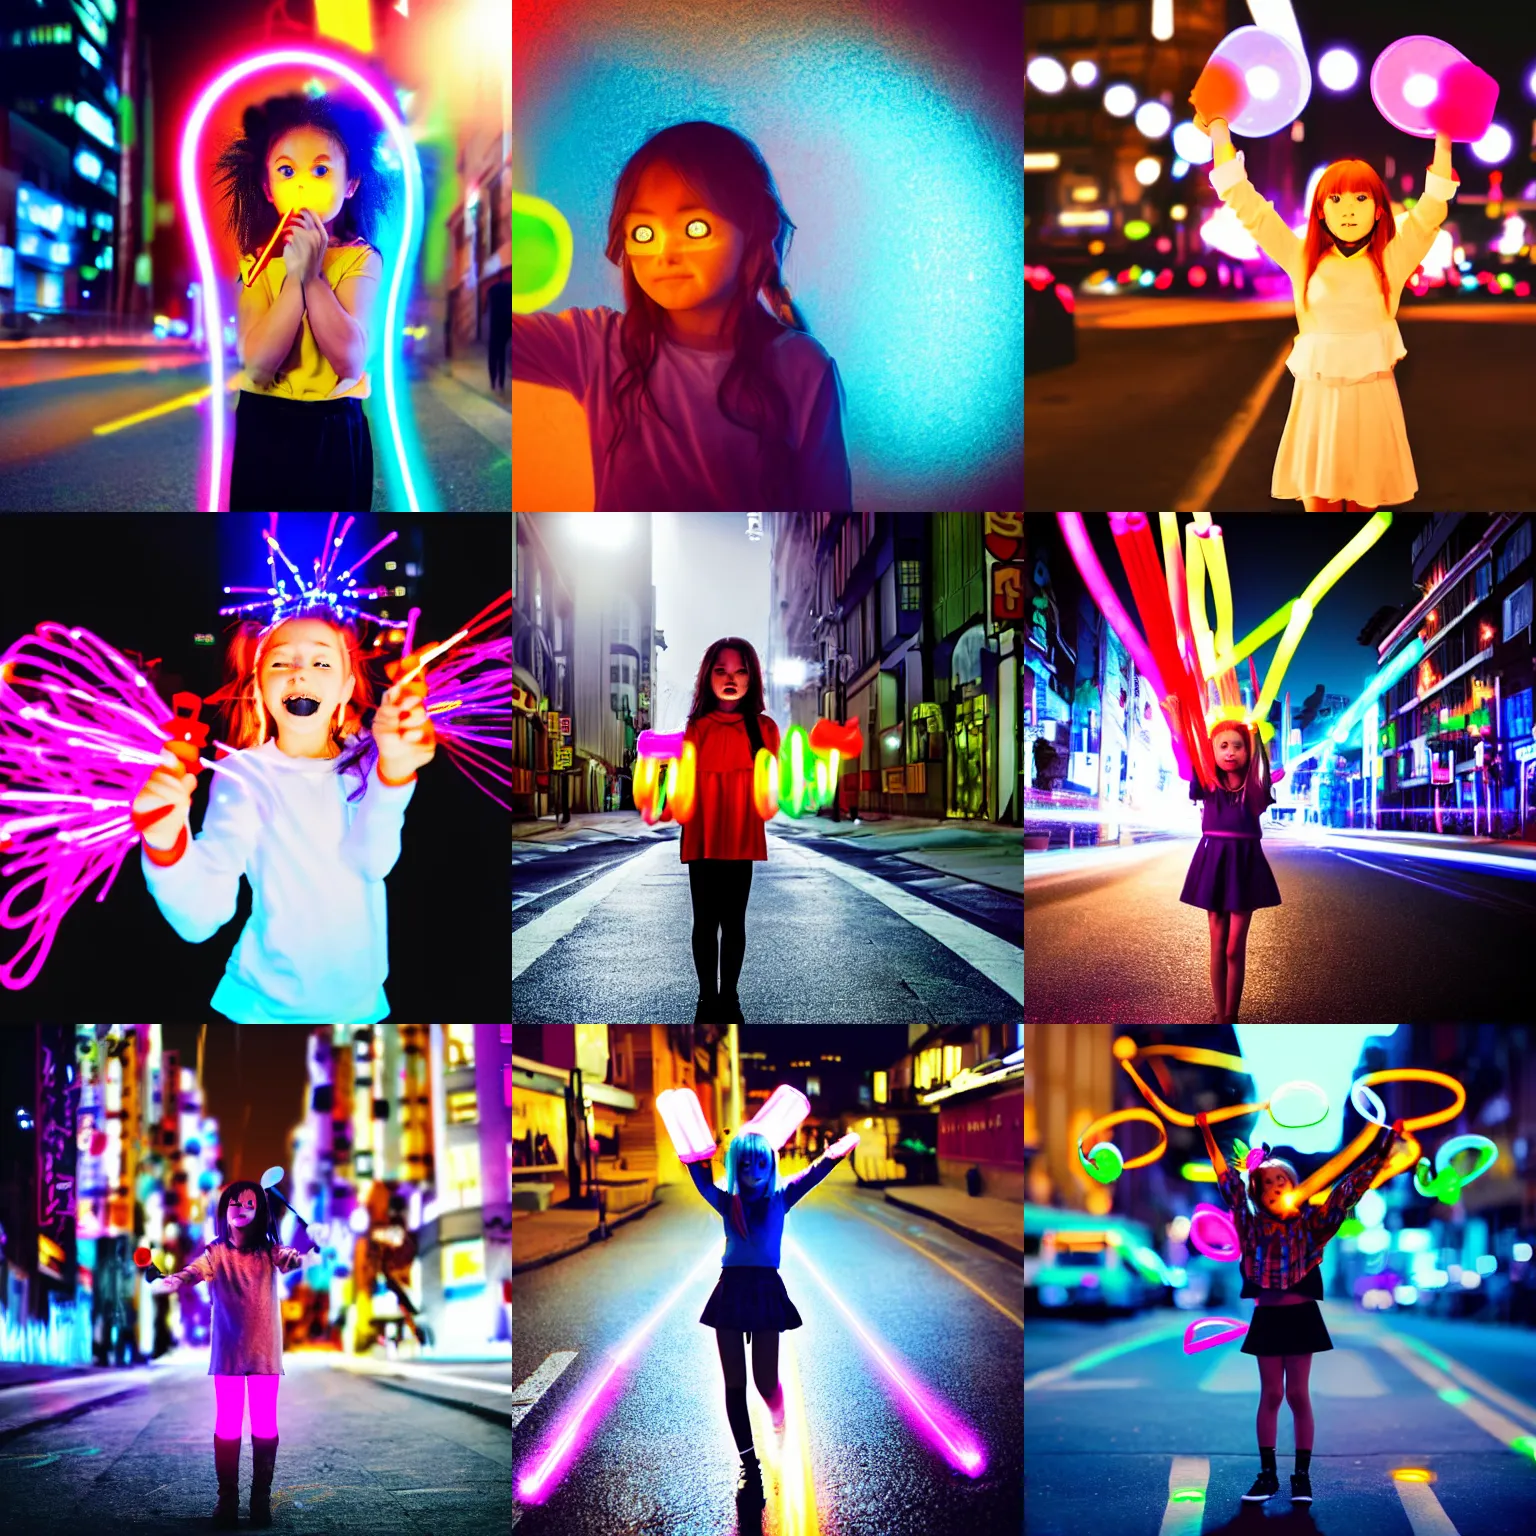 Prompt: anime slow shutter speed anime portrait of curious cartoon girl standing in city street waving glow sticks.